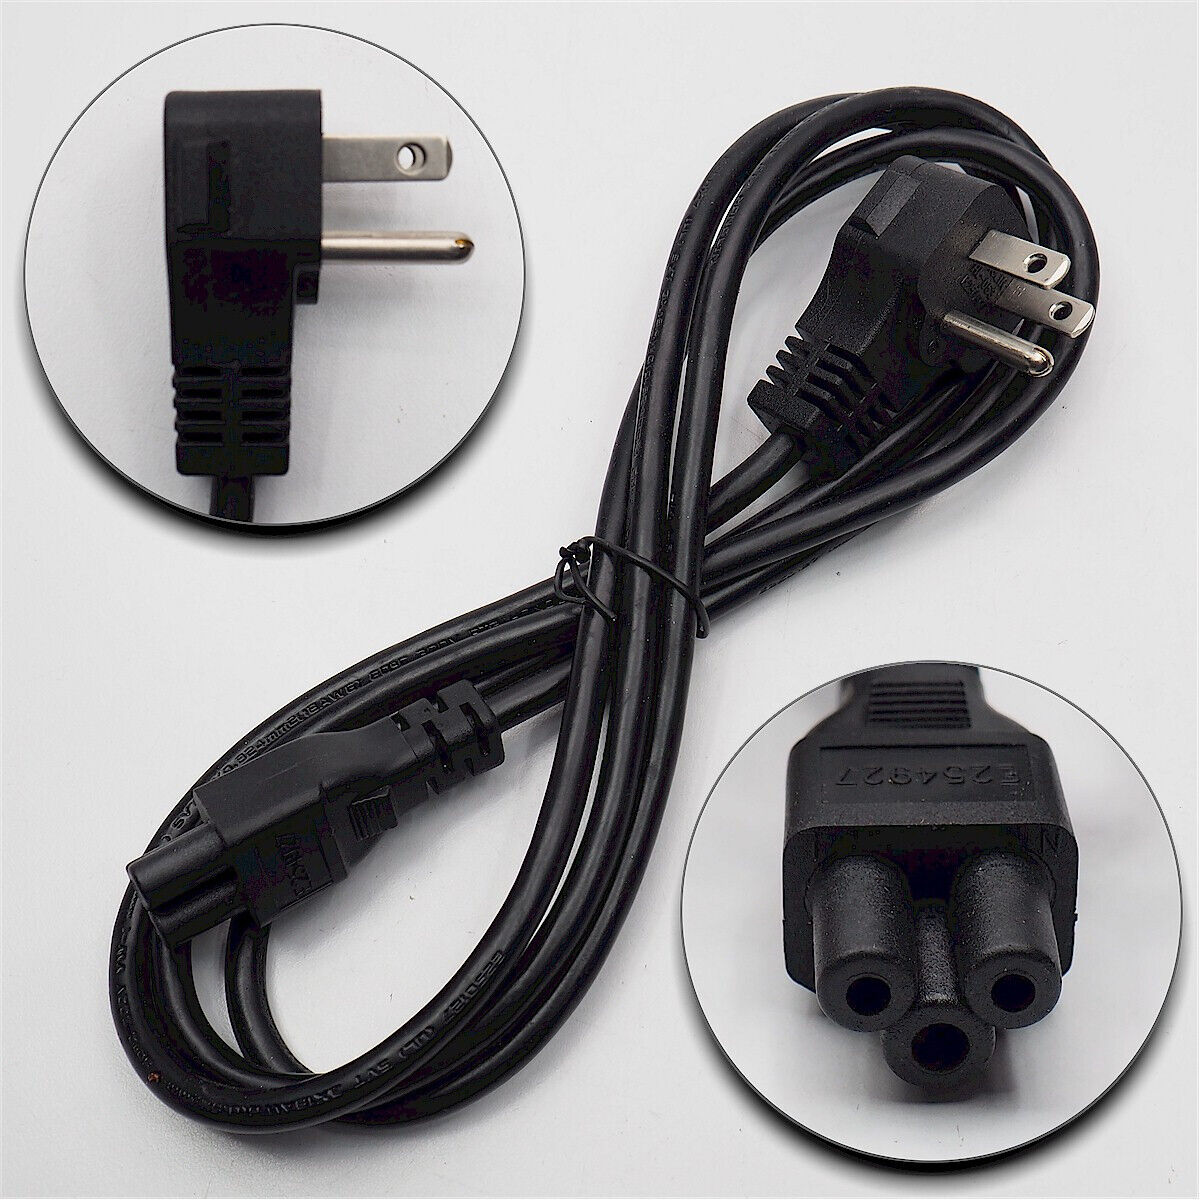 NEW Right Angle Mickey Mouse 3 Prong 3-Pin Plug AC Power Cord. 5ft